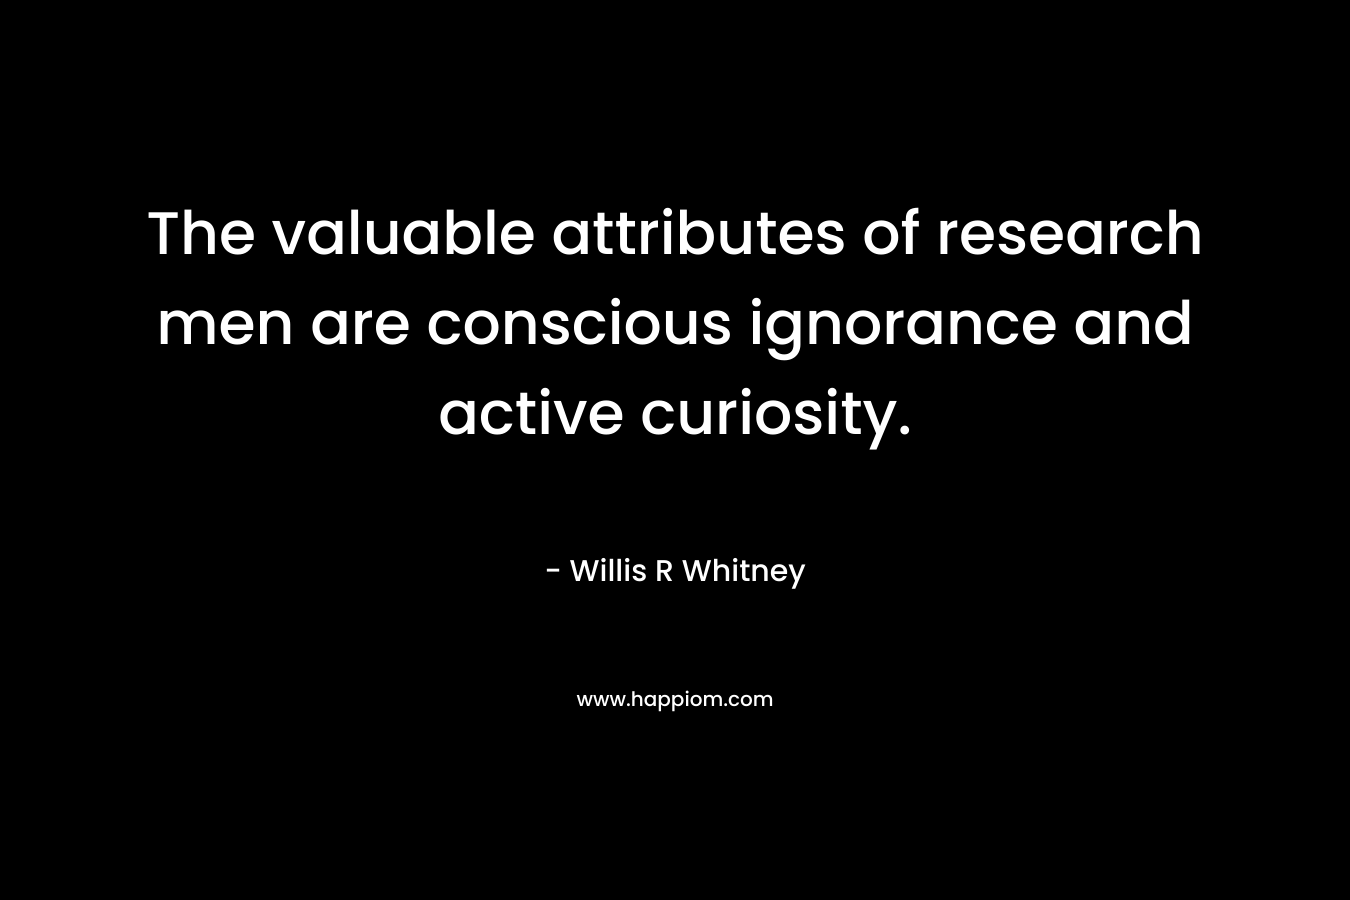 The valuable attributes of research men are conscious ignorance and active curiosity. – Willis R Whitney